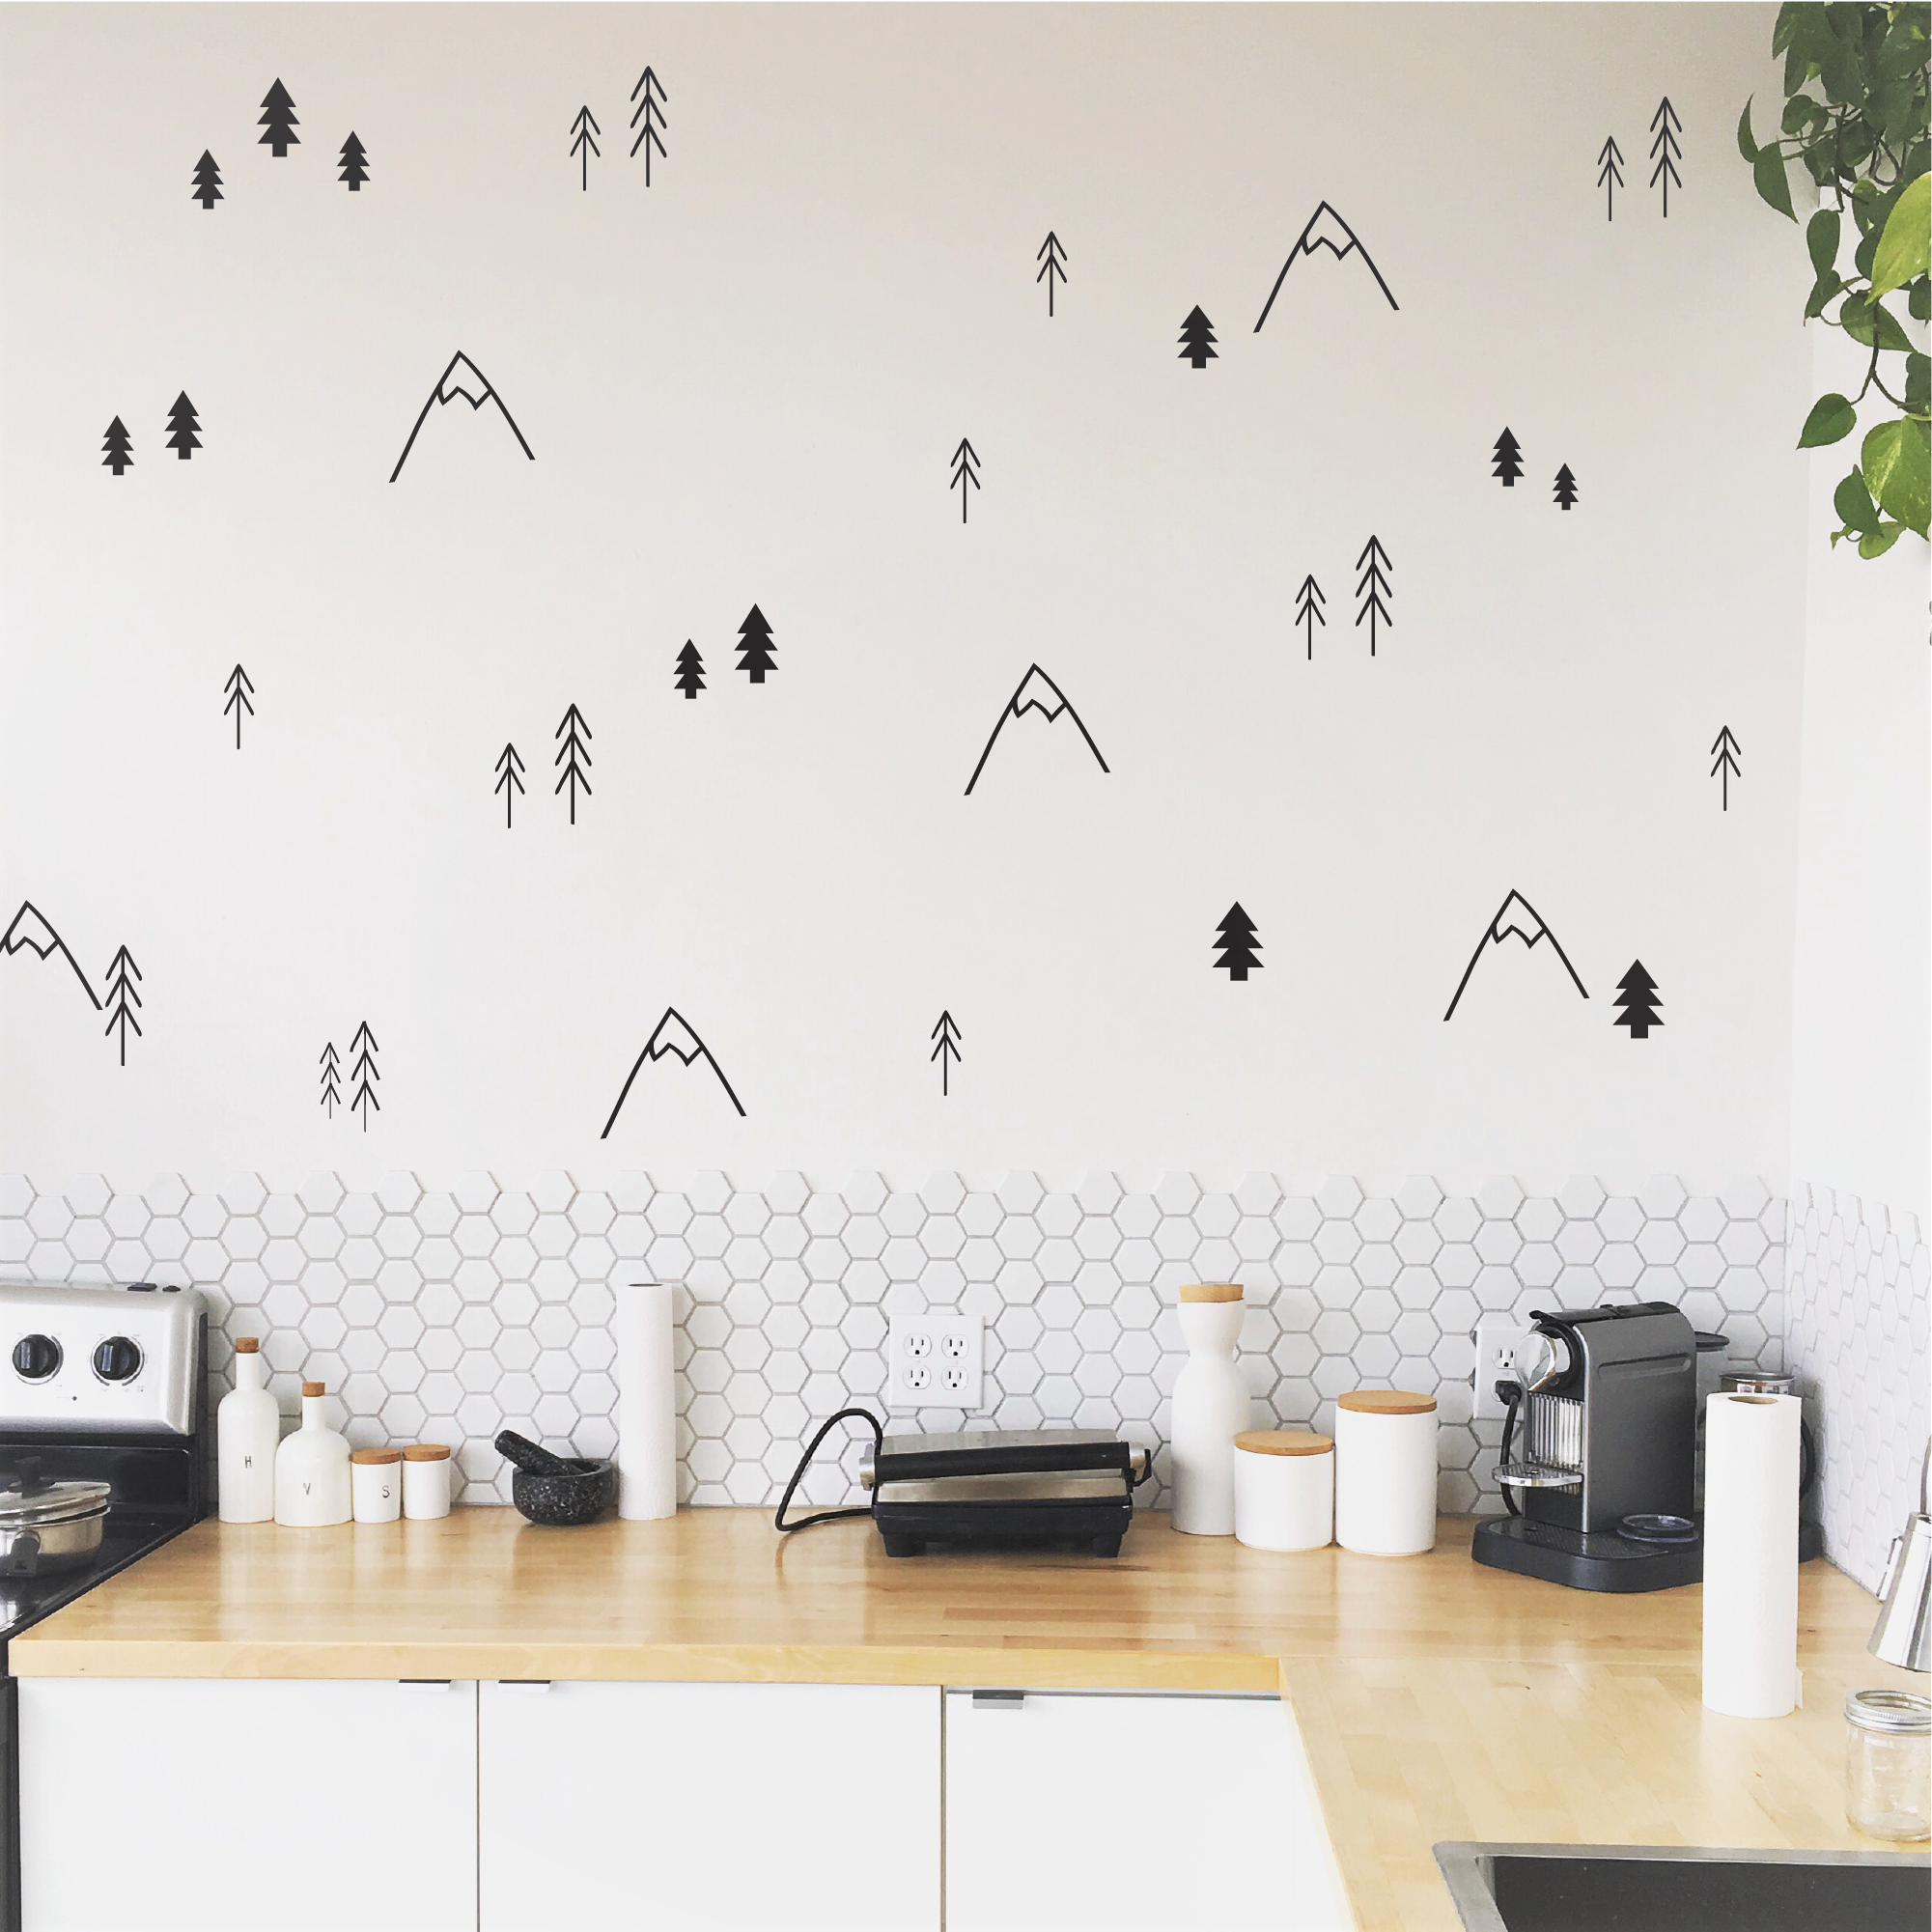 Matchstick Tree and Mountain Wall Decals